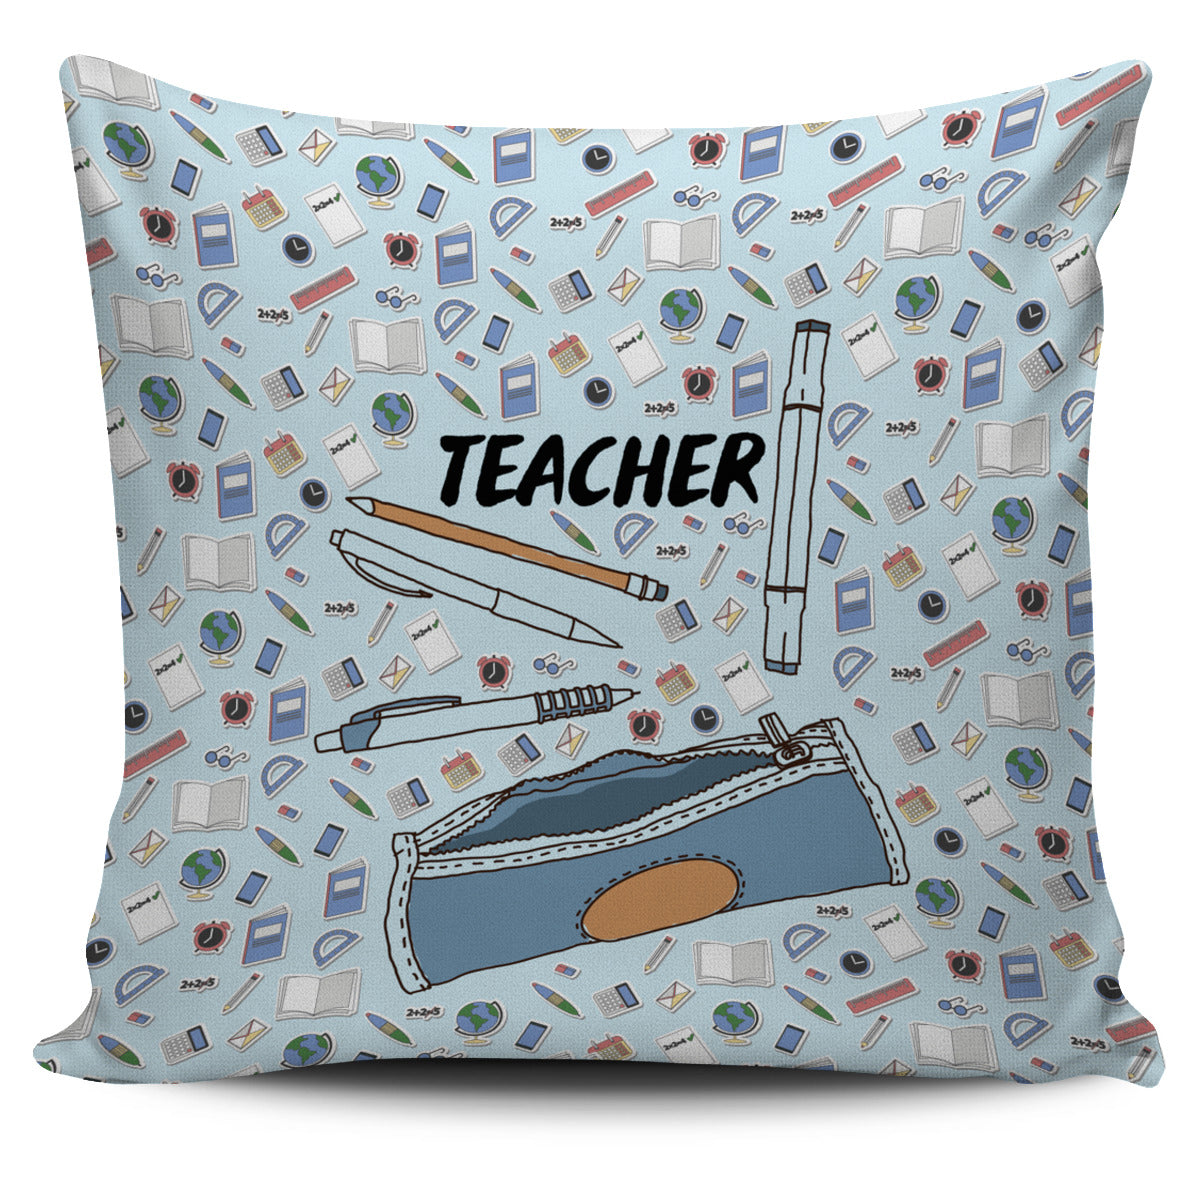 Teaching Education Pillow Cover